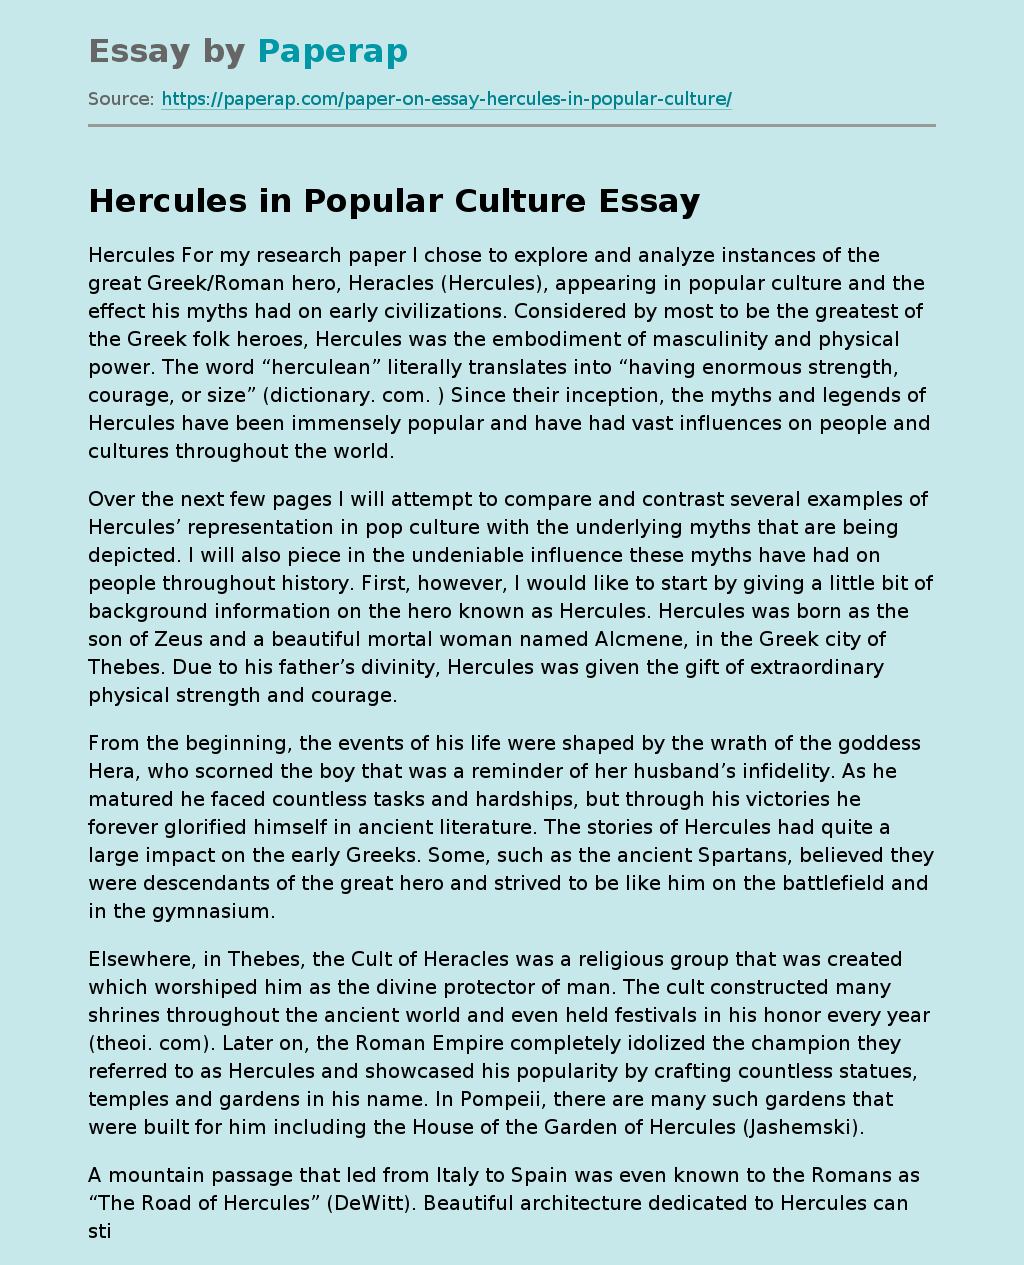 Emergence of the Greco-Roman Hero Hercules in Popular Culture